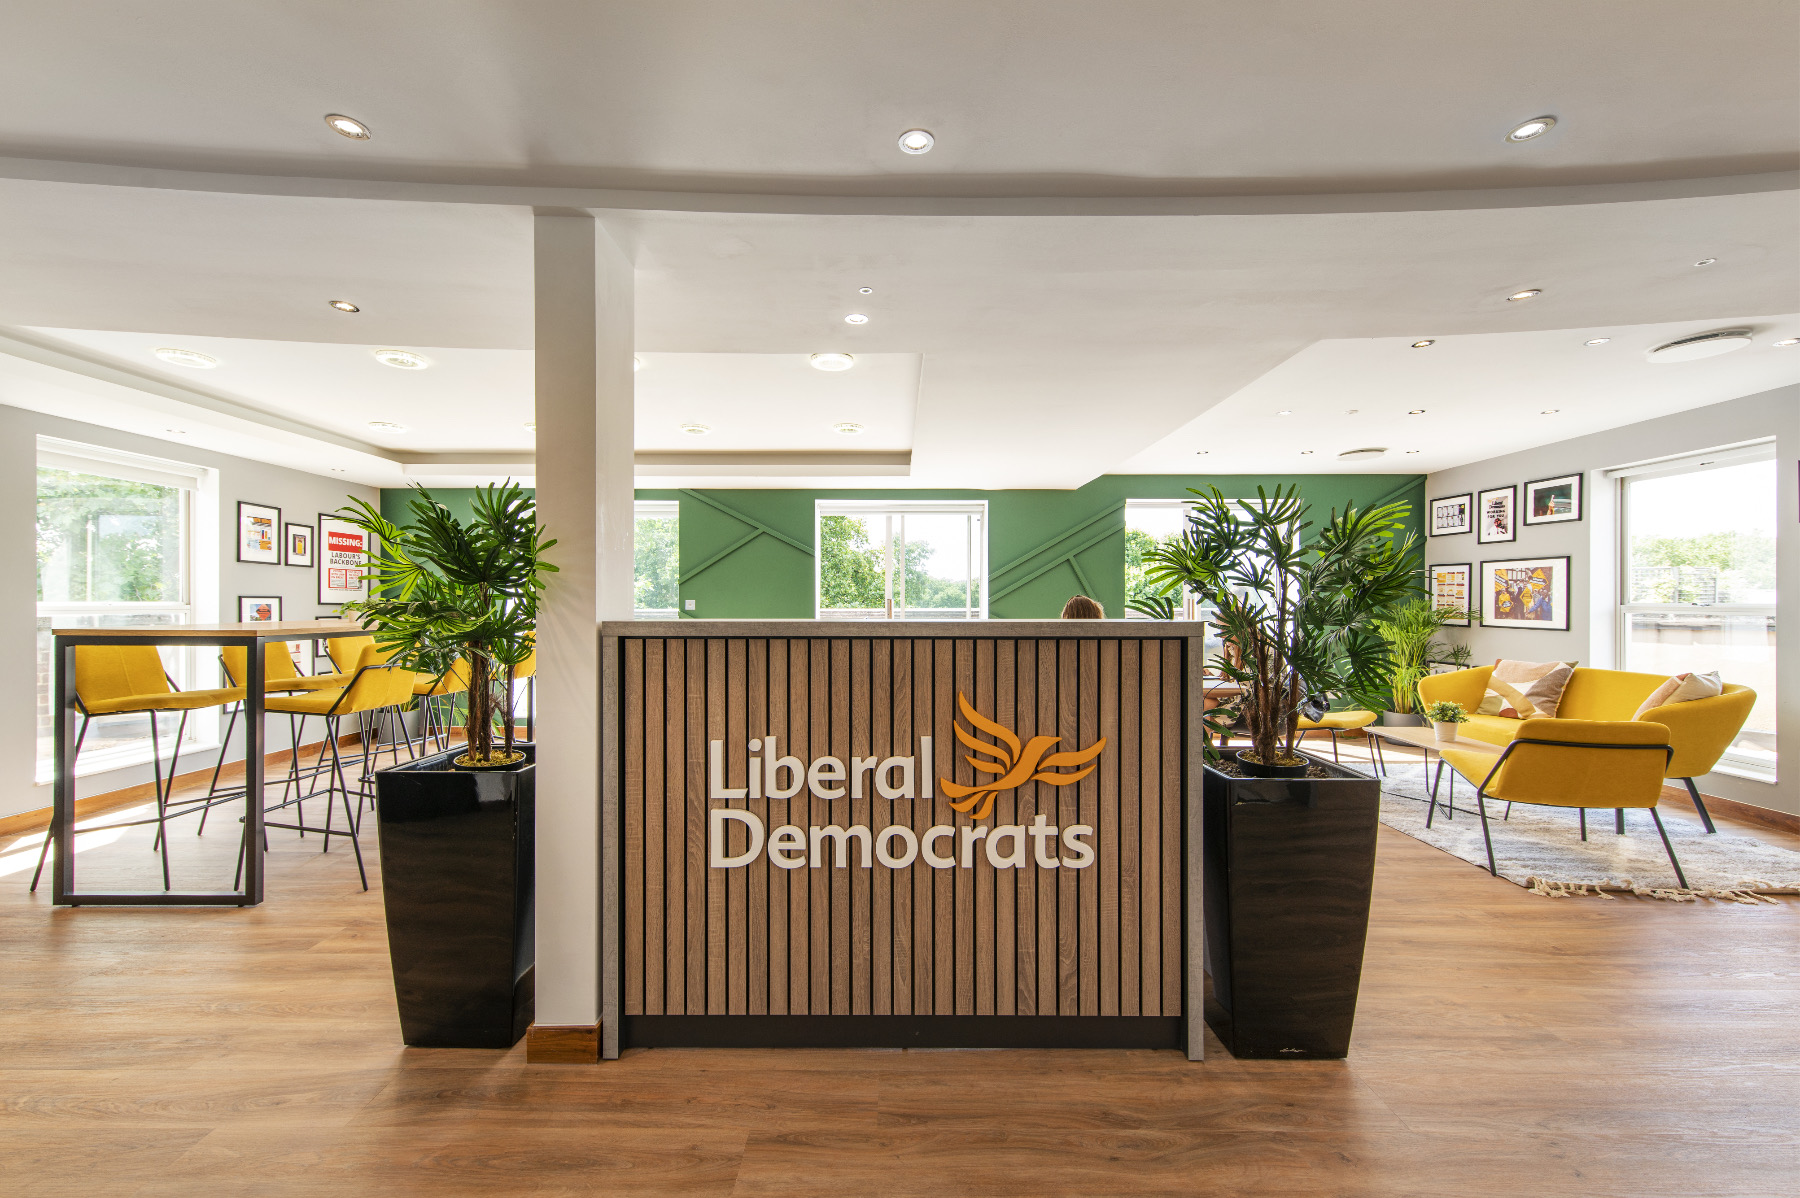 A Tour of Liberal Democrats’ New London Office